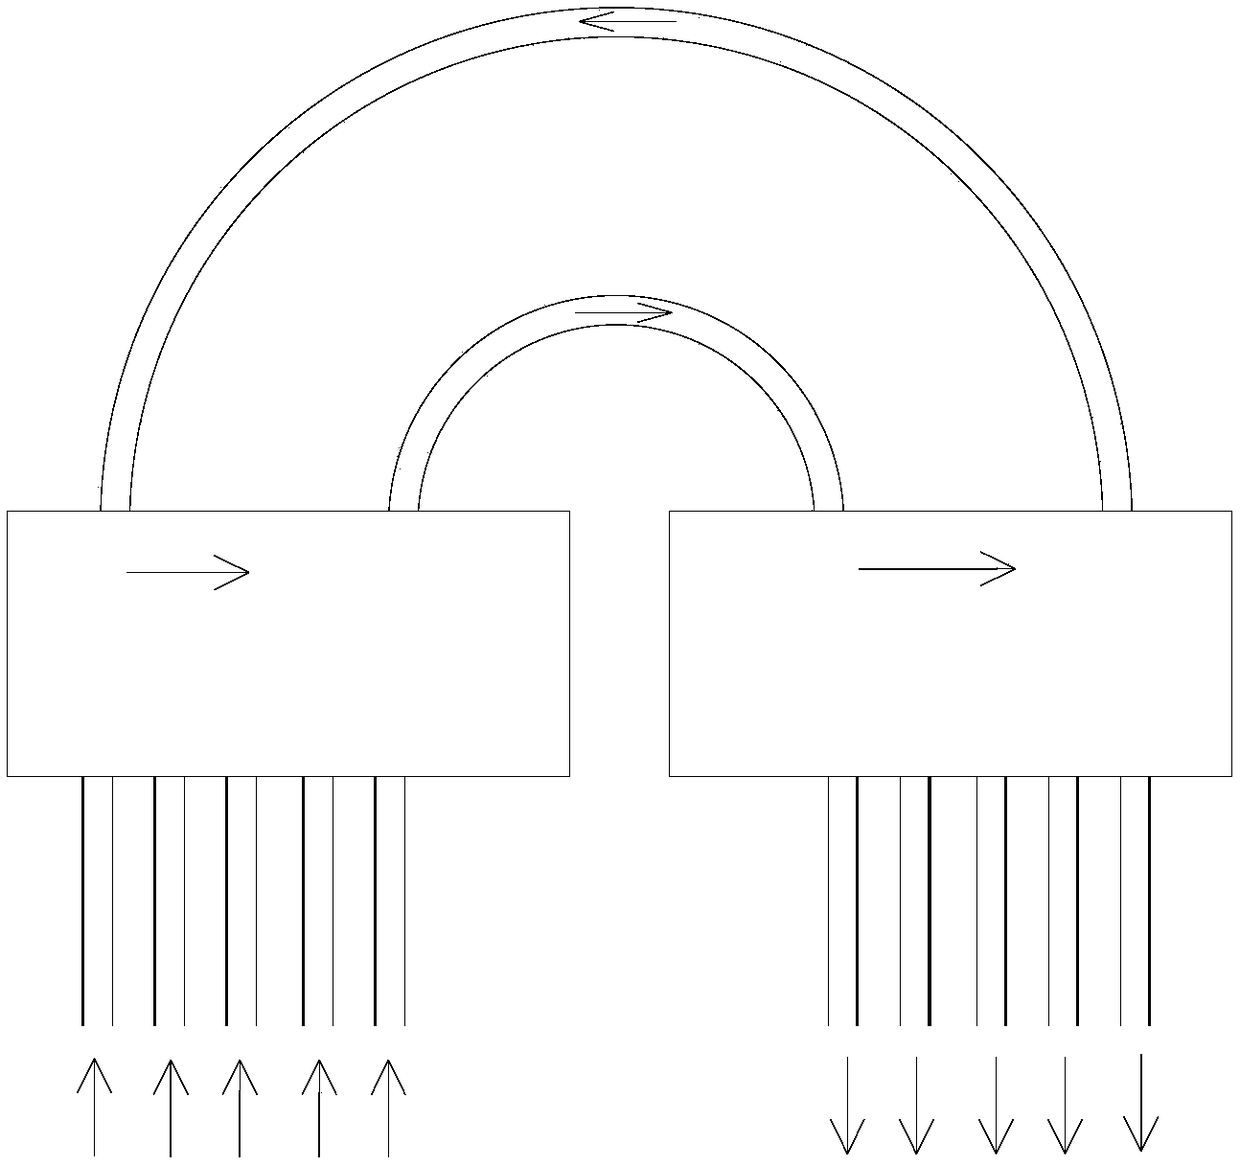 Steam generator primary-side structure capable of alleviating backflow of U-shaped pipes